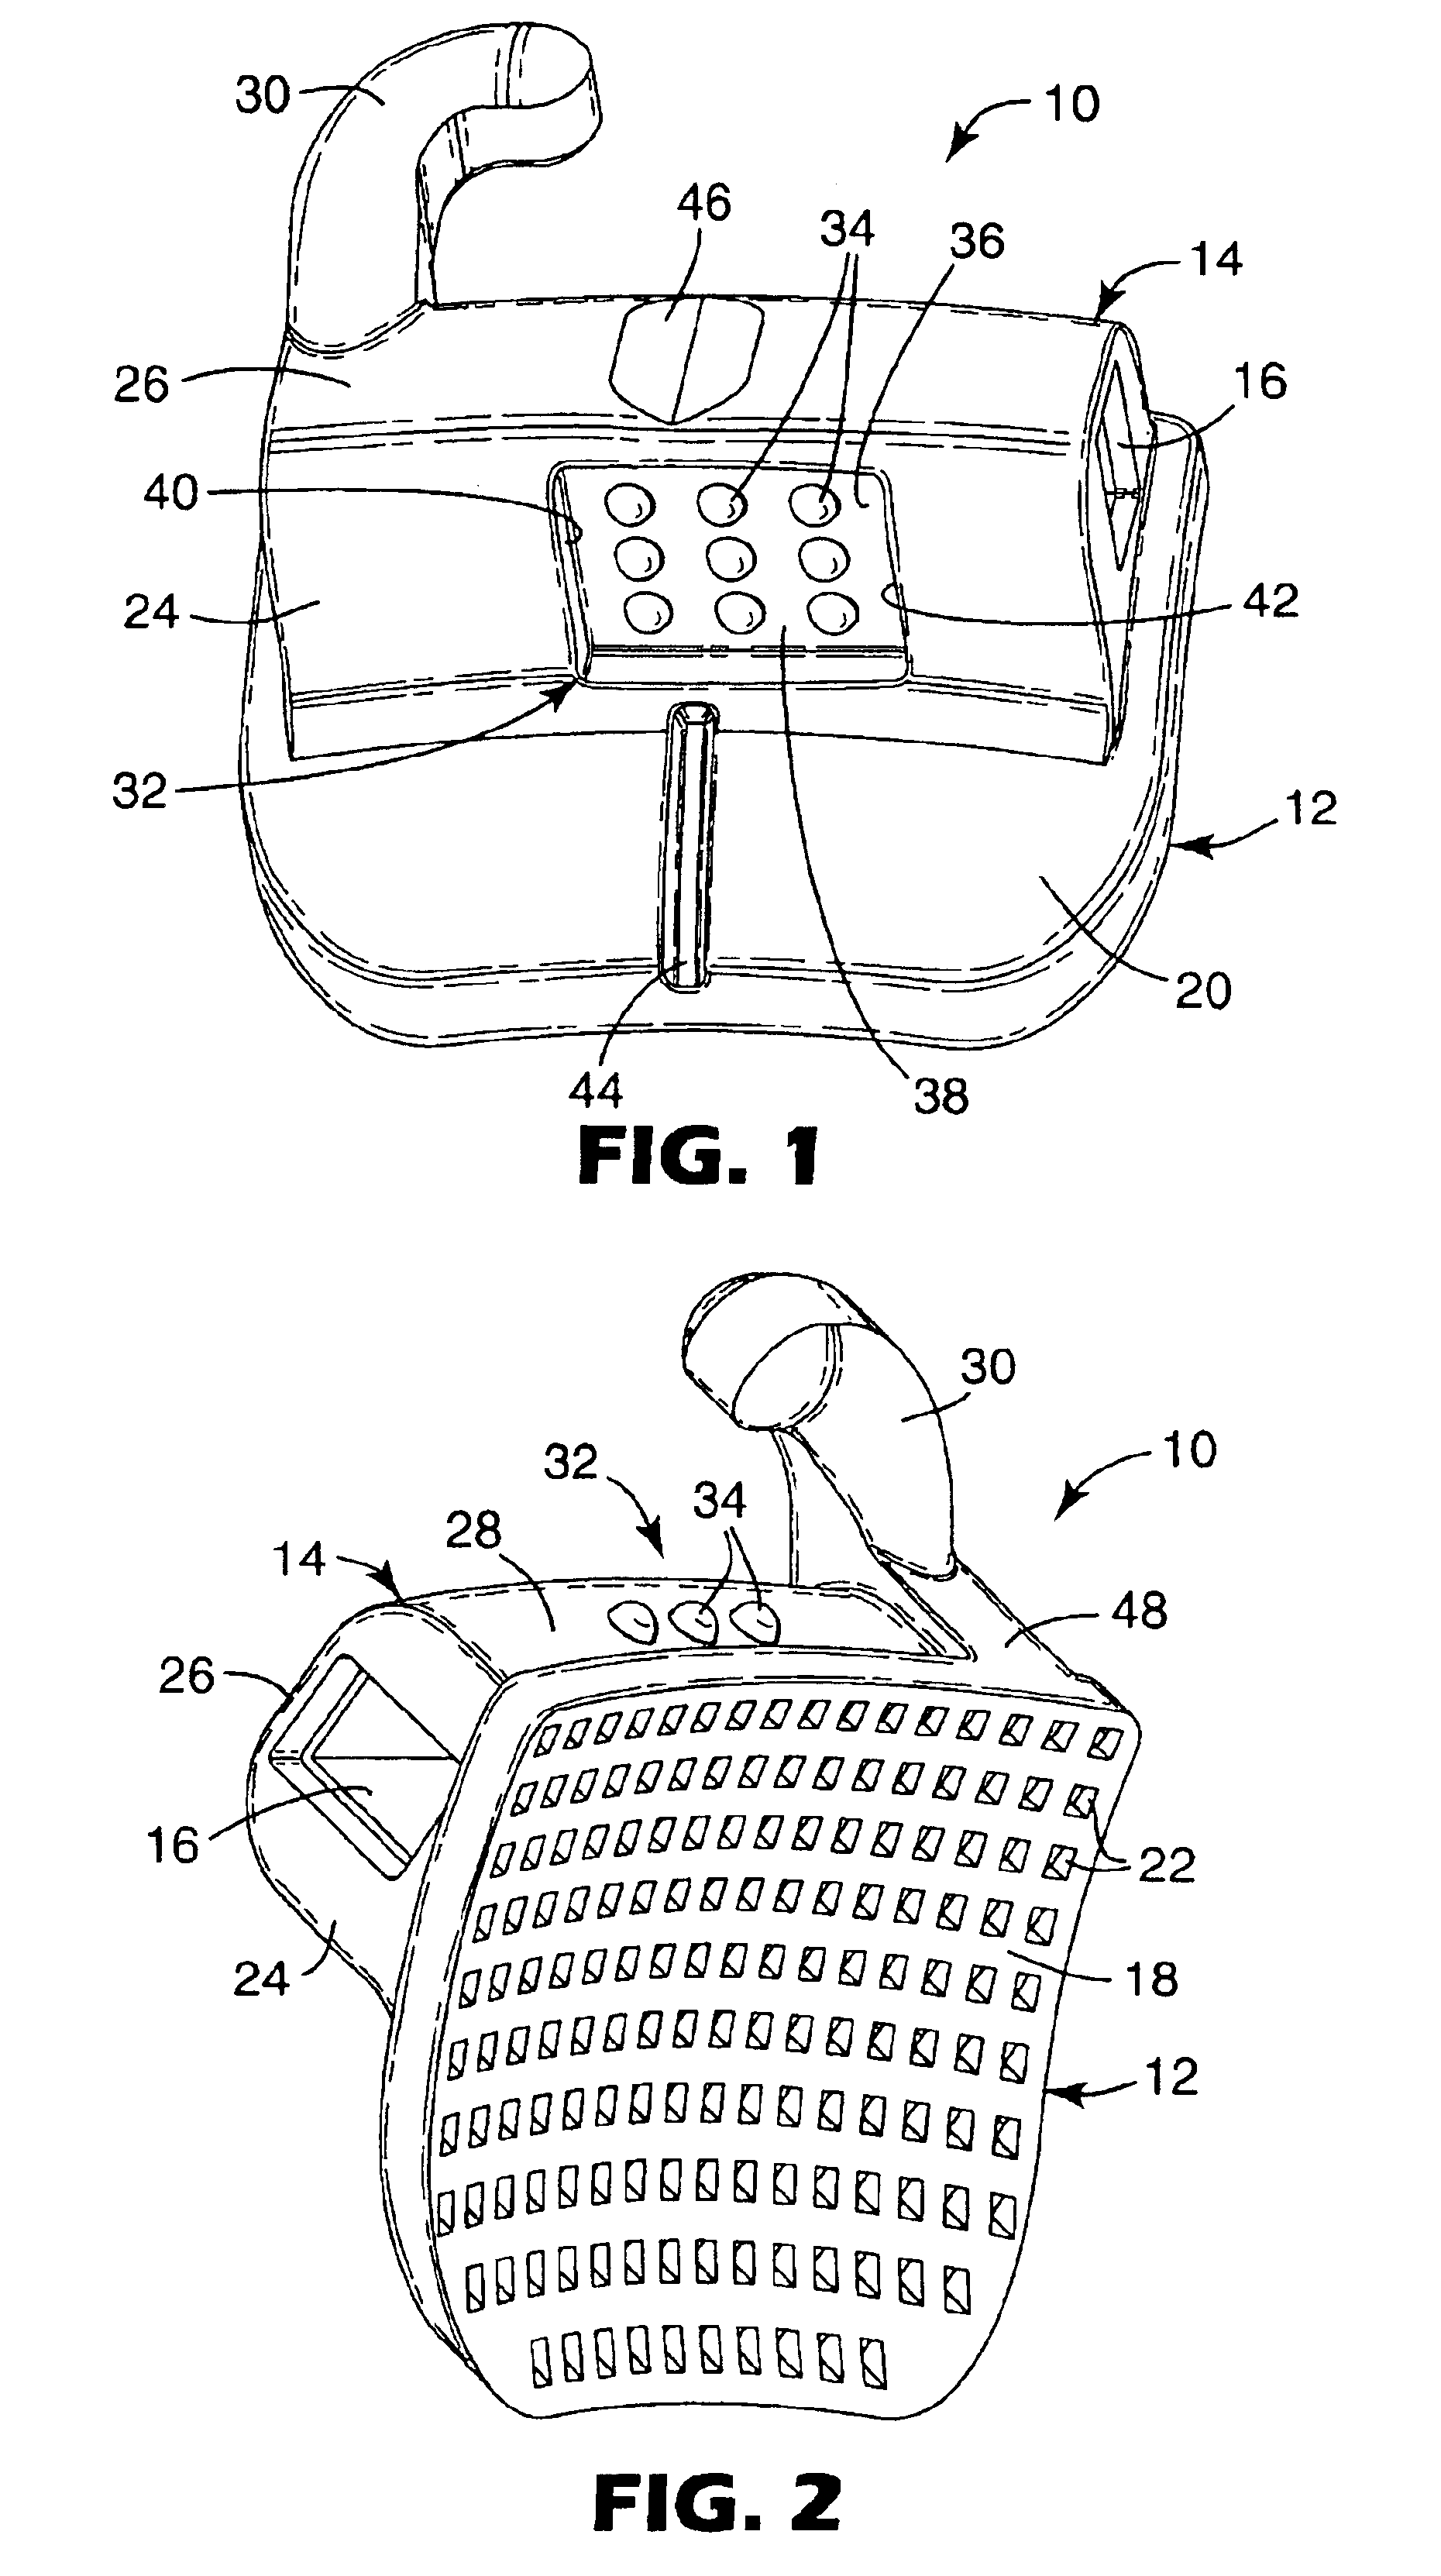 Orthodontic appliance with placement enhancement structure